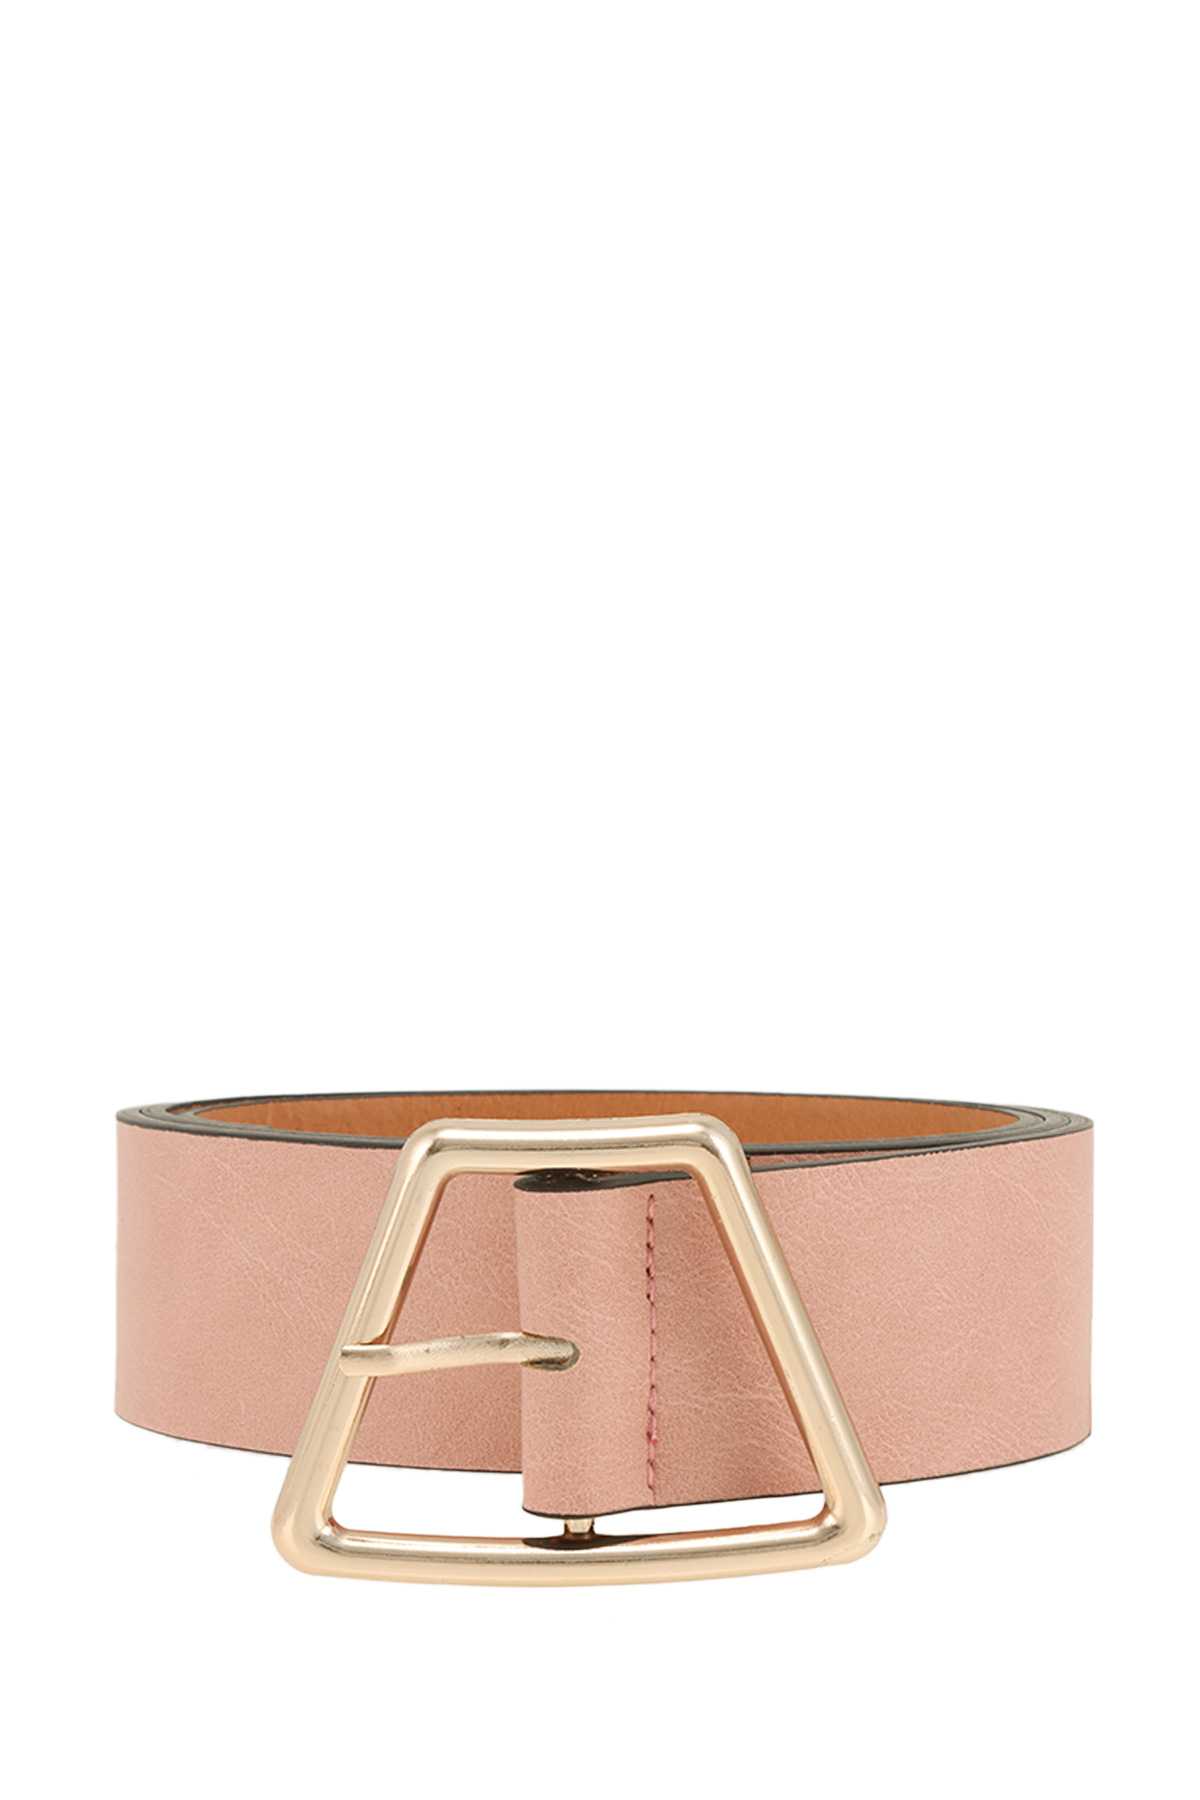 Trapezoid Look Buckle Faux Leather Belt